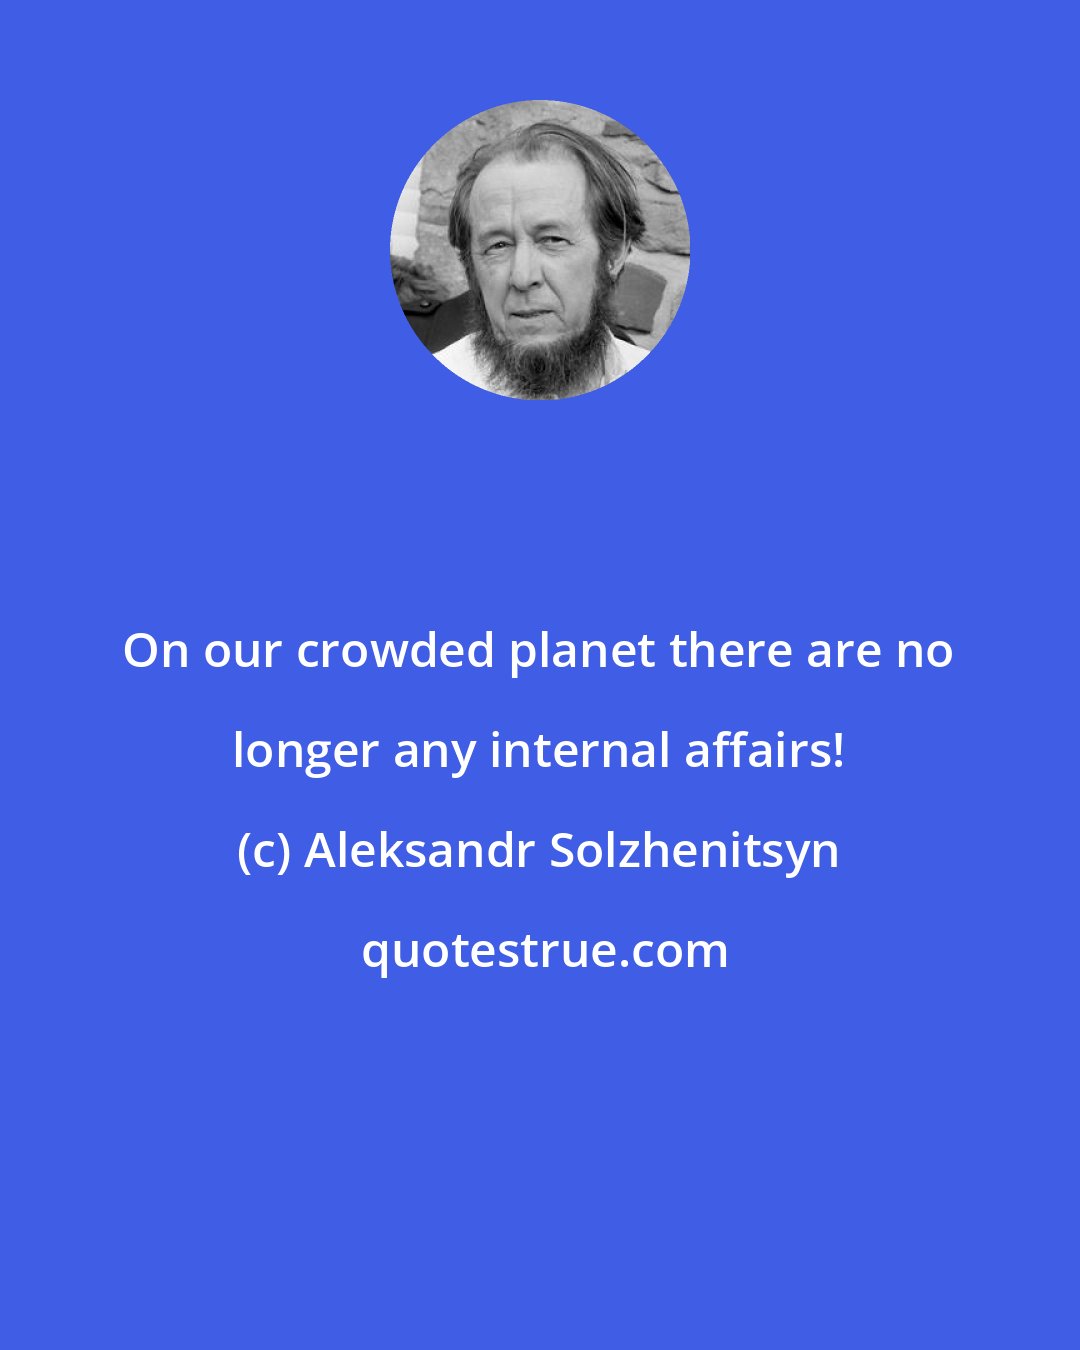 Aleksandr Solzhenitsyn: On our crowded planet there are no longer any internal affairs!